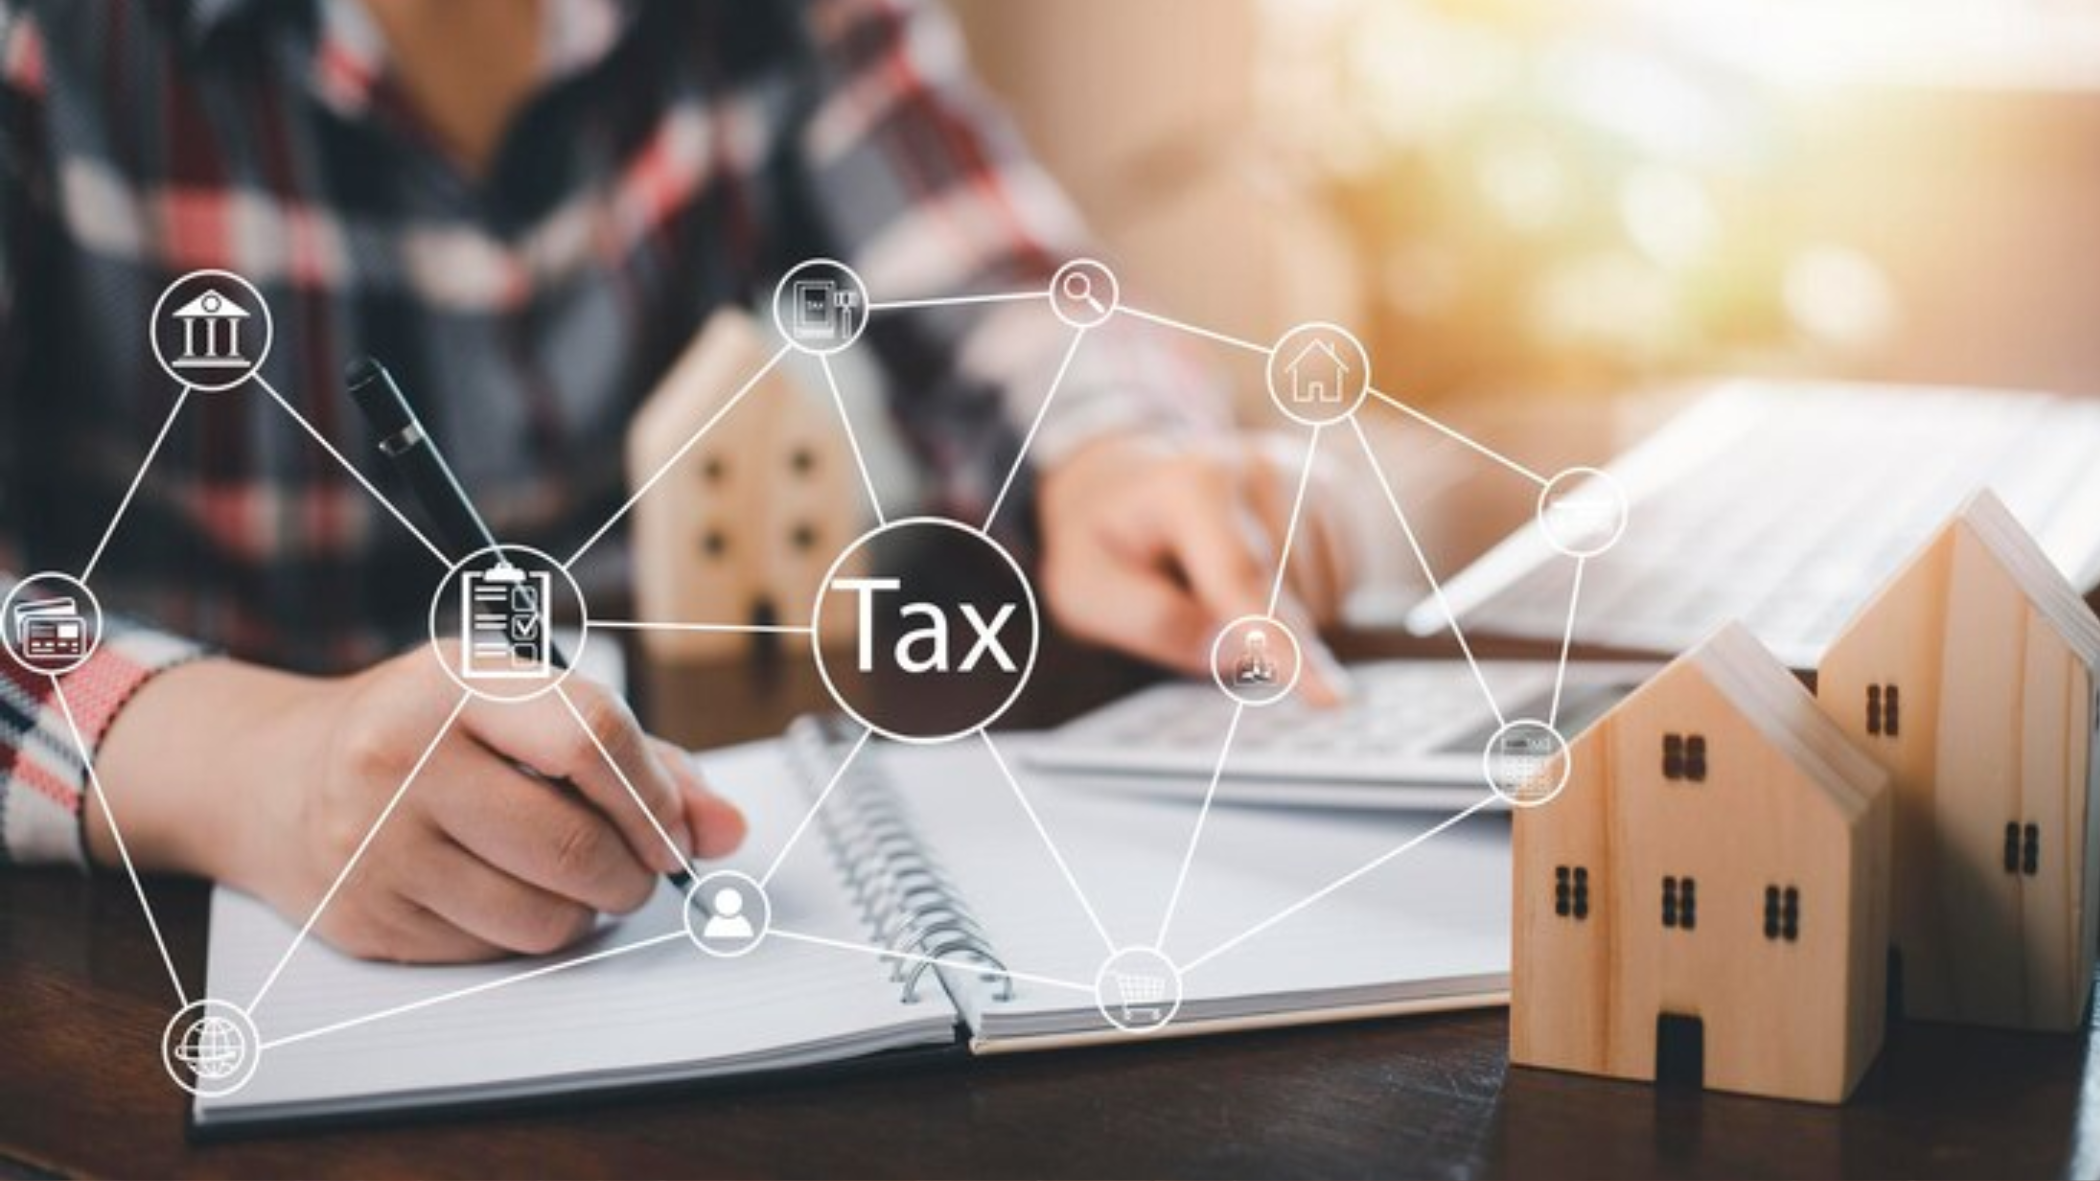 Misconceptions about GST in real estate